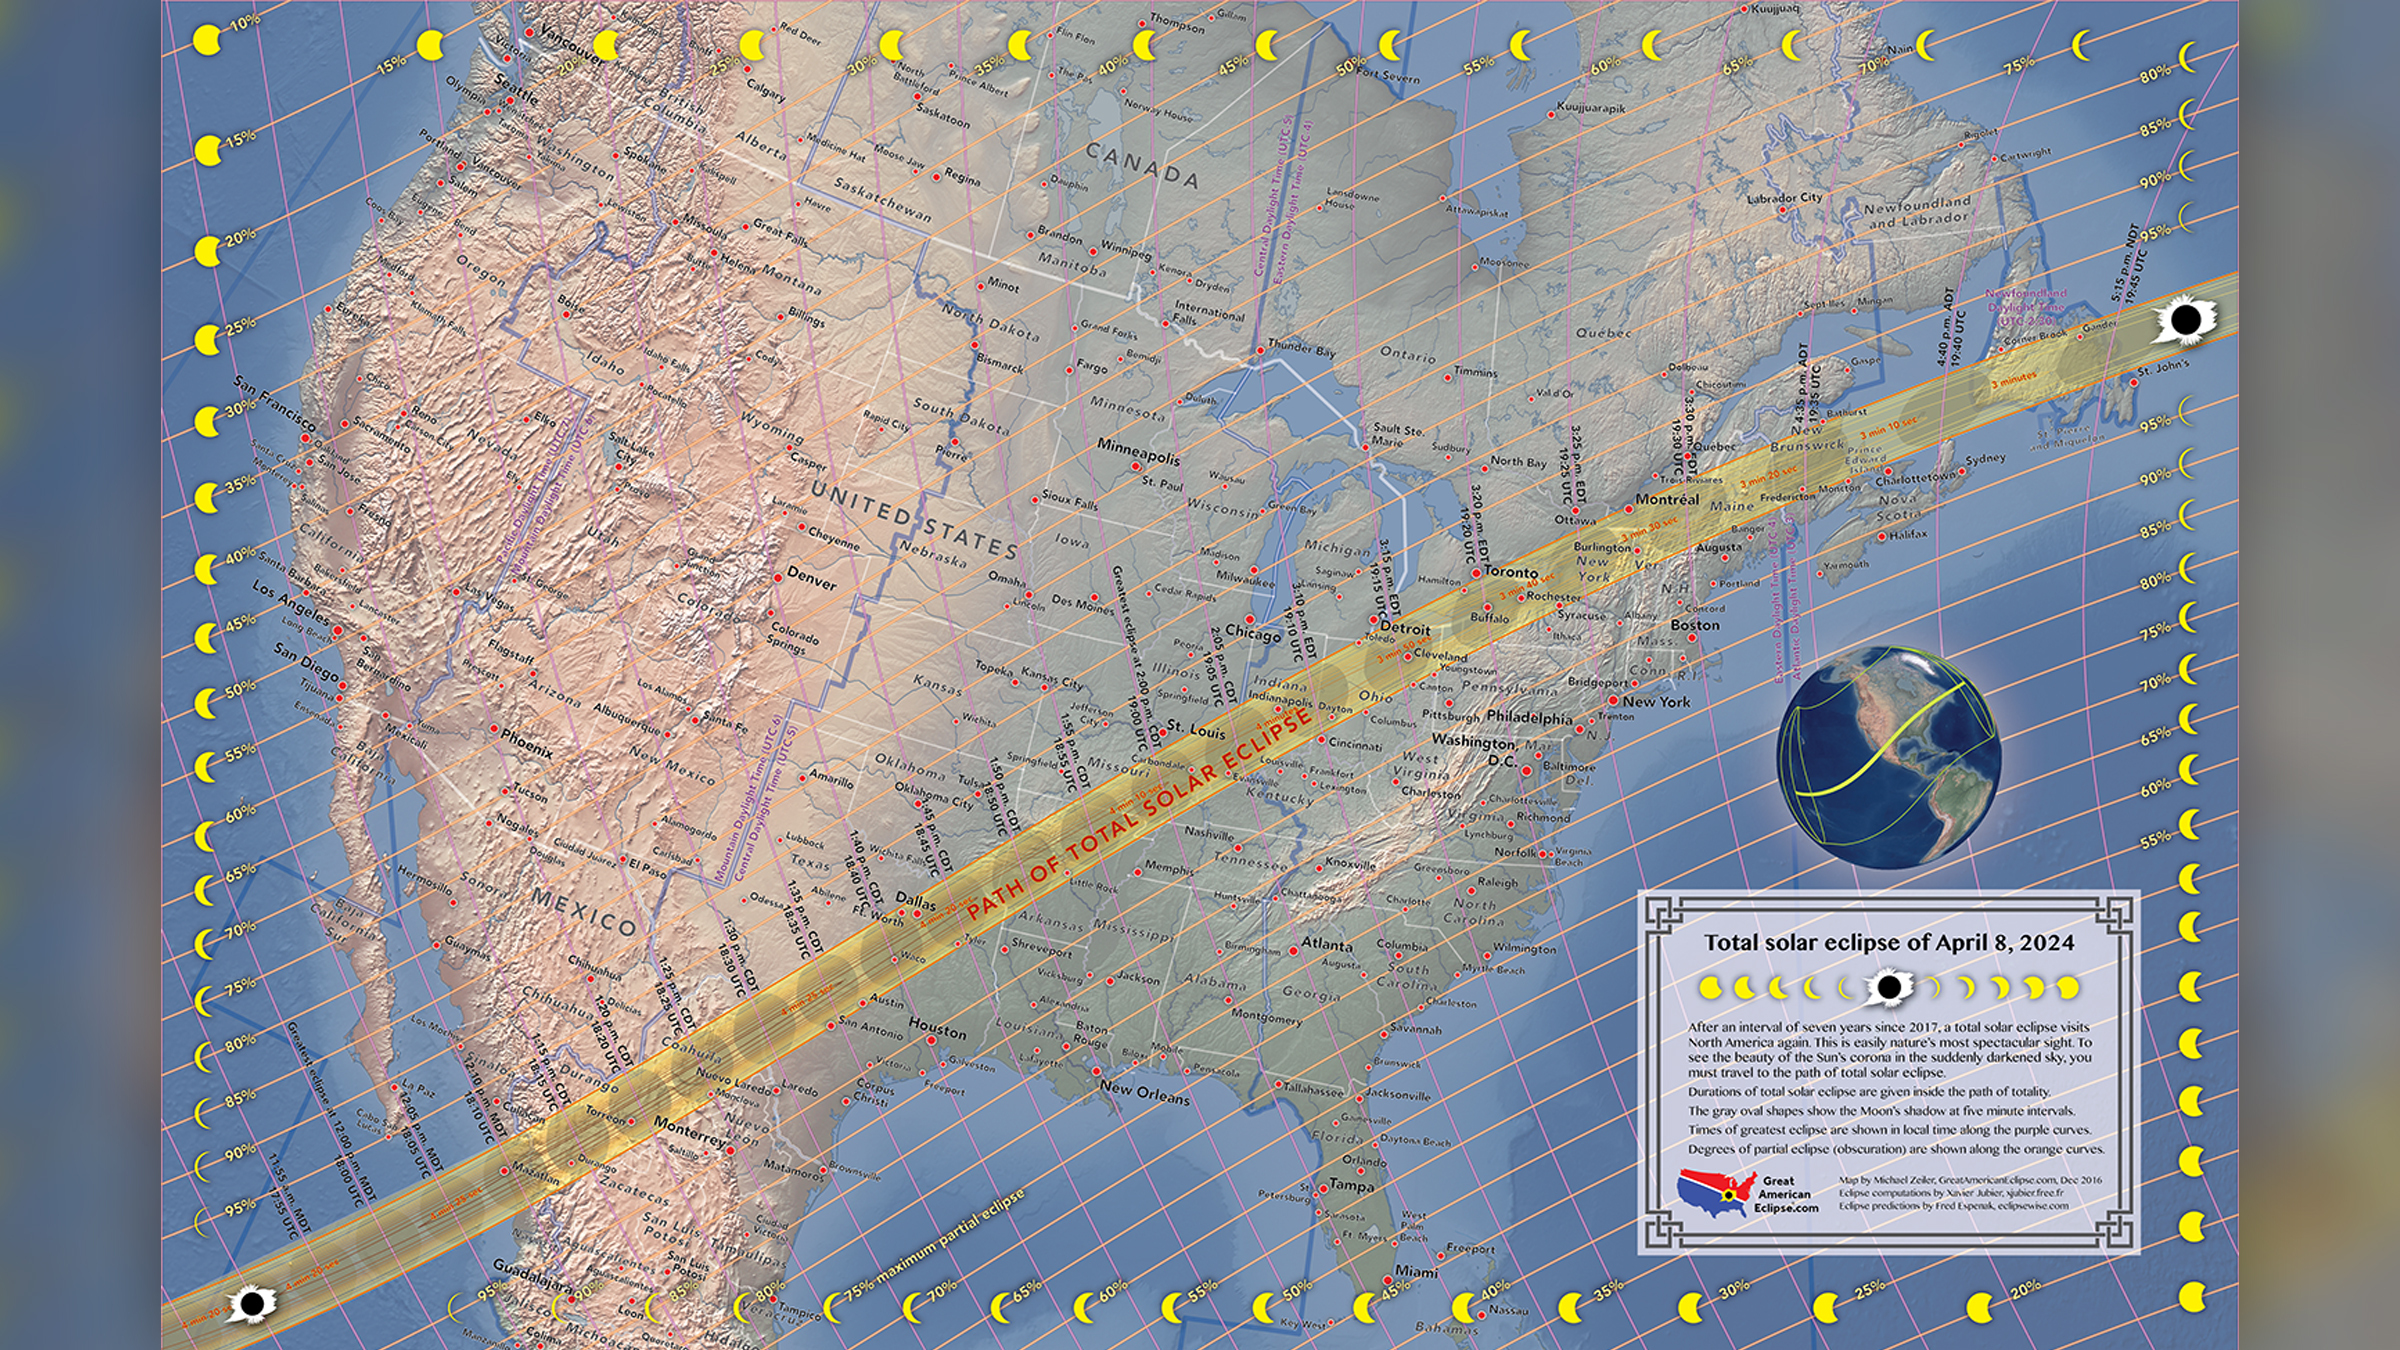 The entire U.S. will experience a partial eclipse, while the yellow path shows the path of totality where people will have the opportunity to see totality.